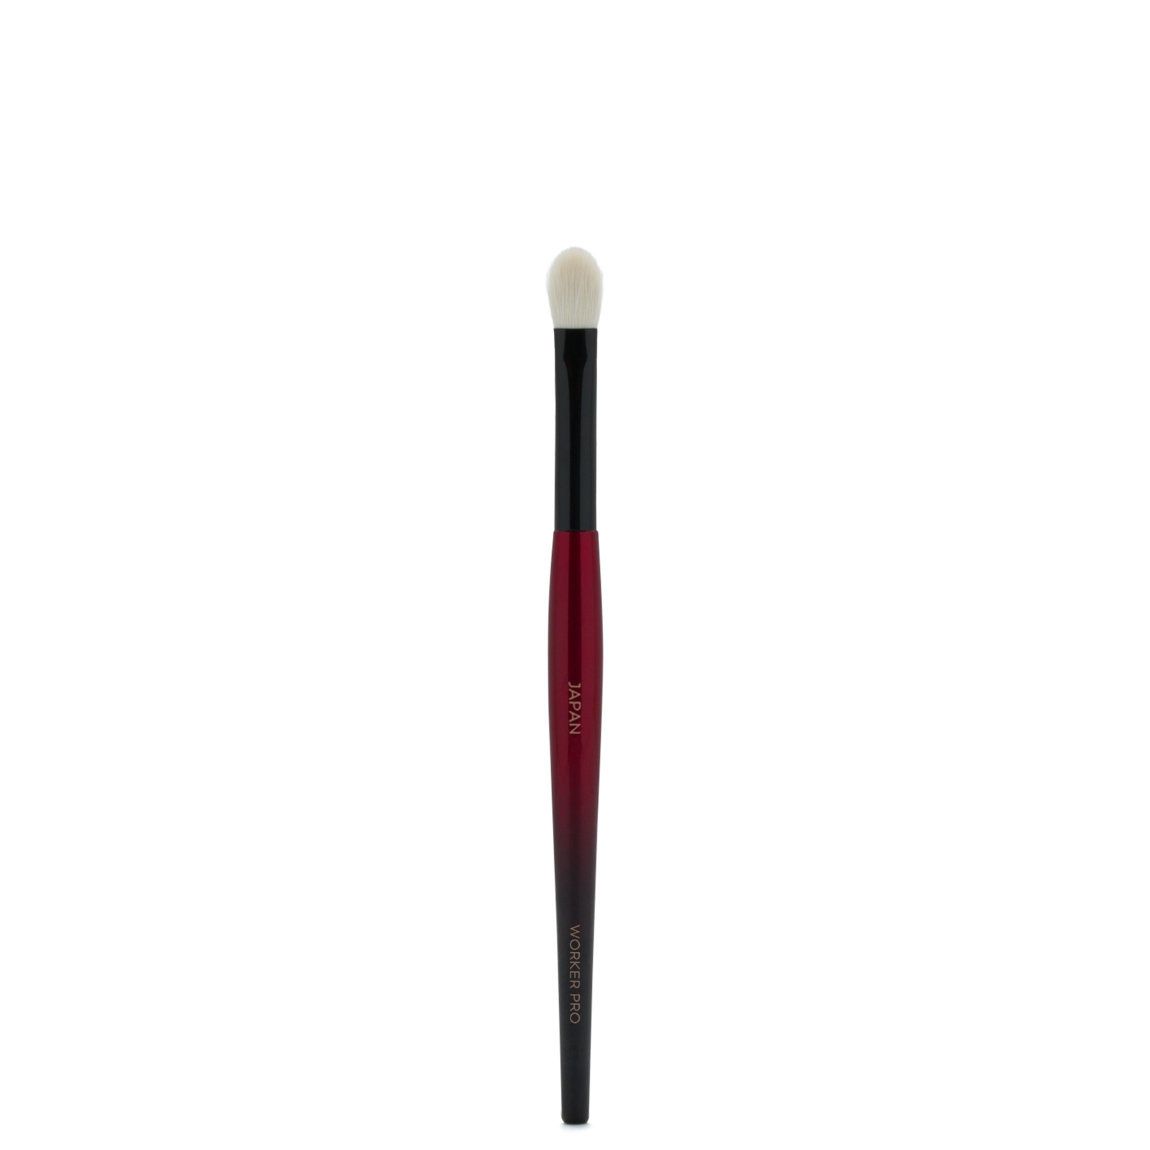 Sonia G.


Worker Pro


  $30  
  



  The versatile eyeshadow brush that does it all.



  
  
... | Beautylish